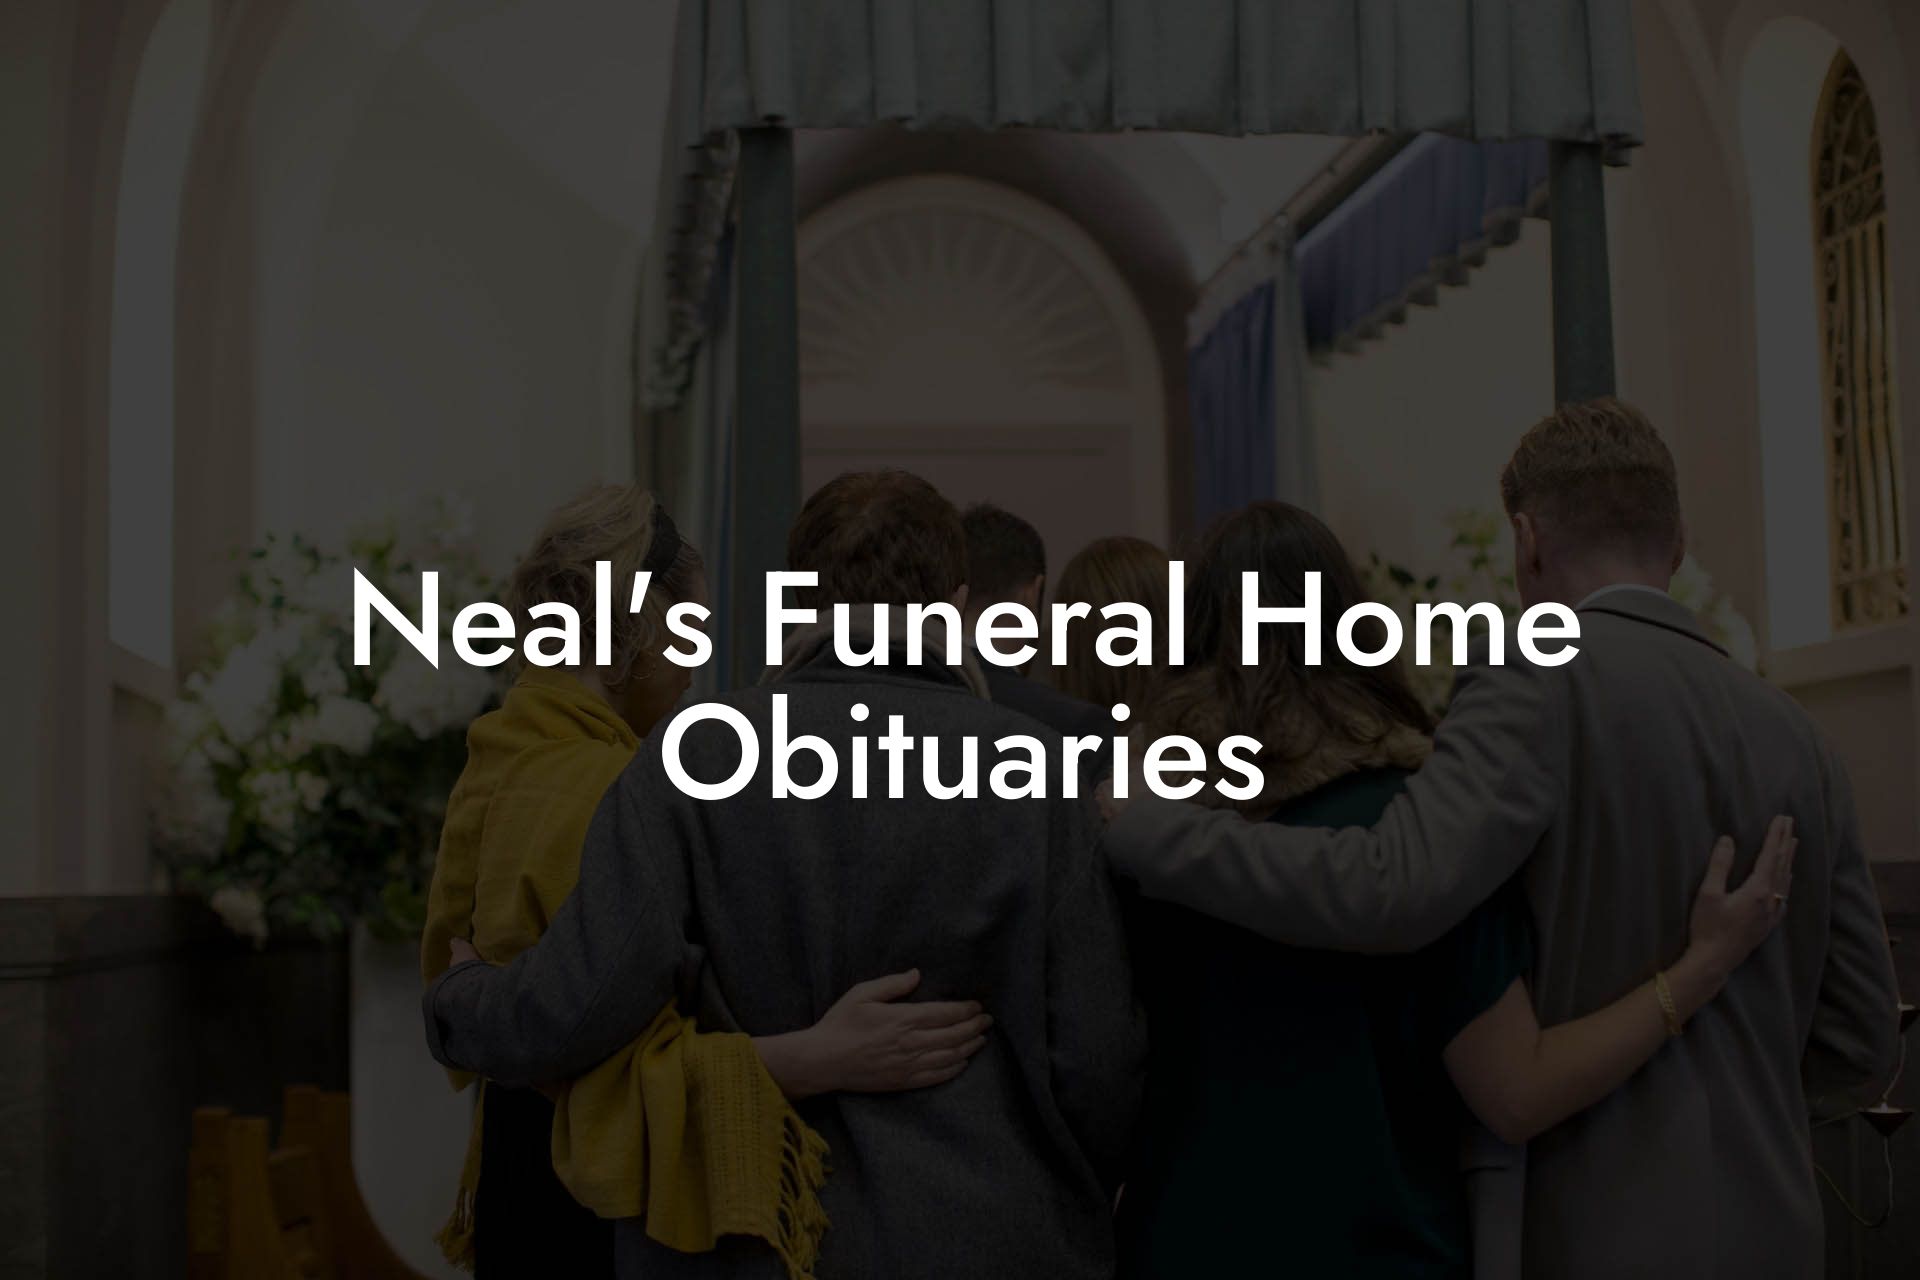 Neal's Funeral Home Obituaries